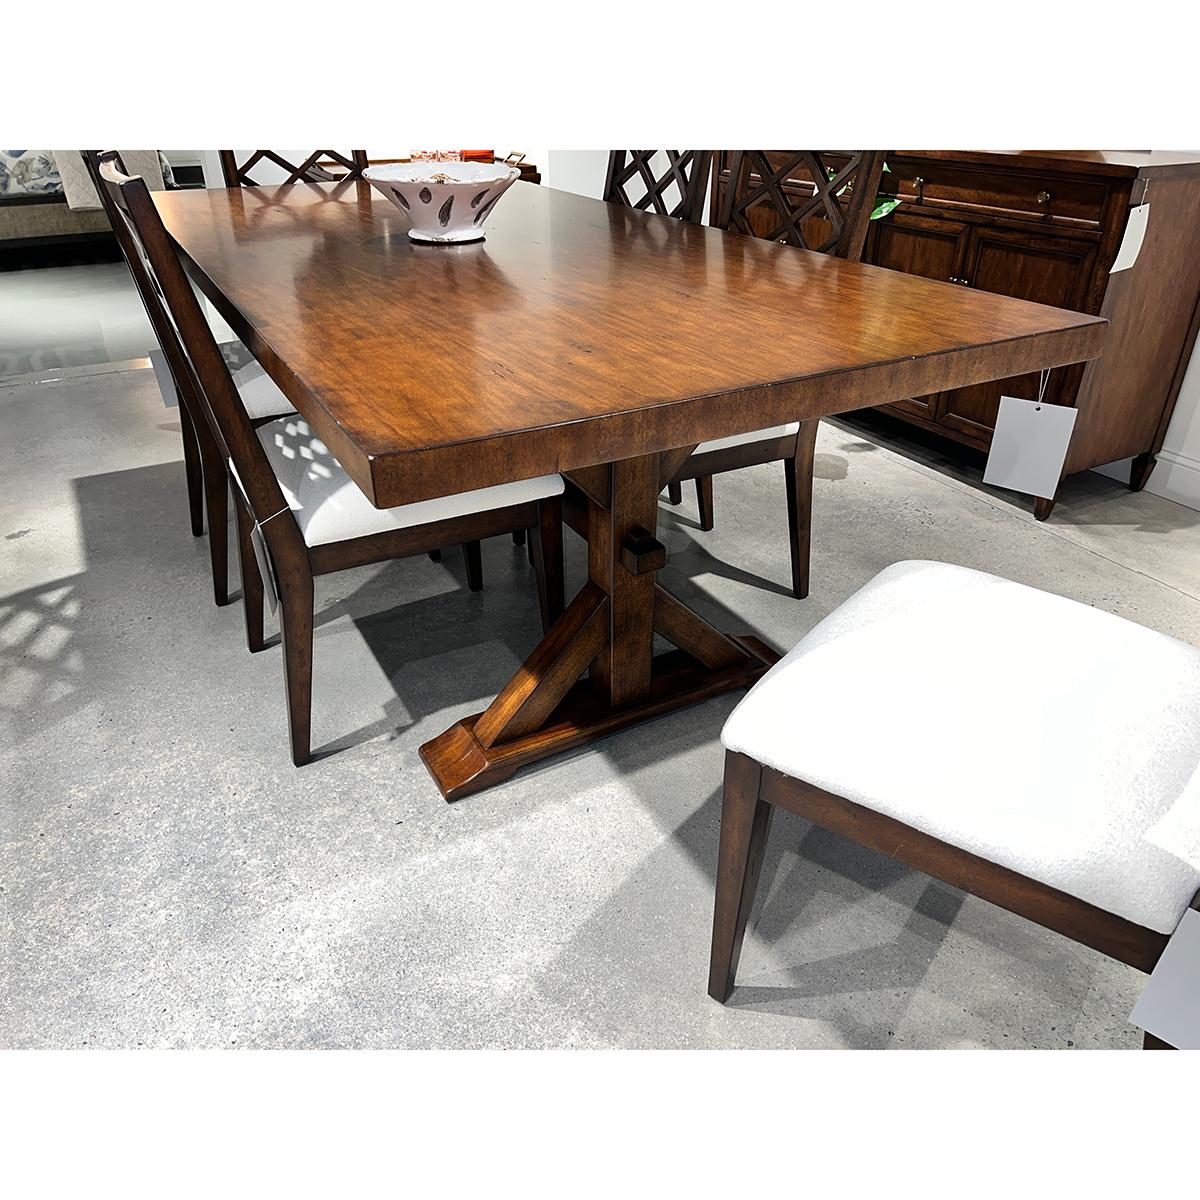 Contemporary Country Trestle Dining Table, Dark Rustic Finish For Sale